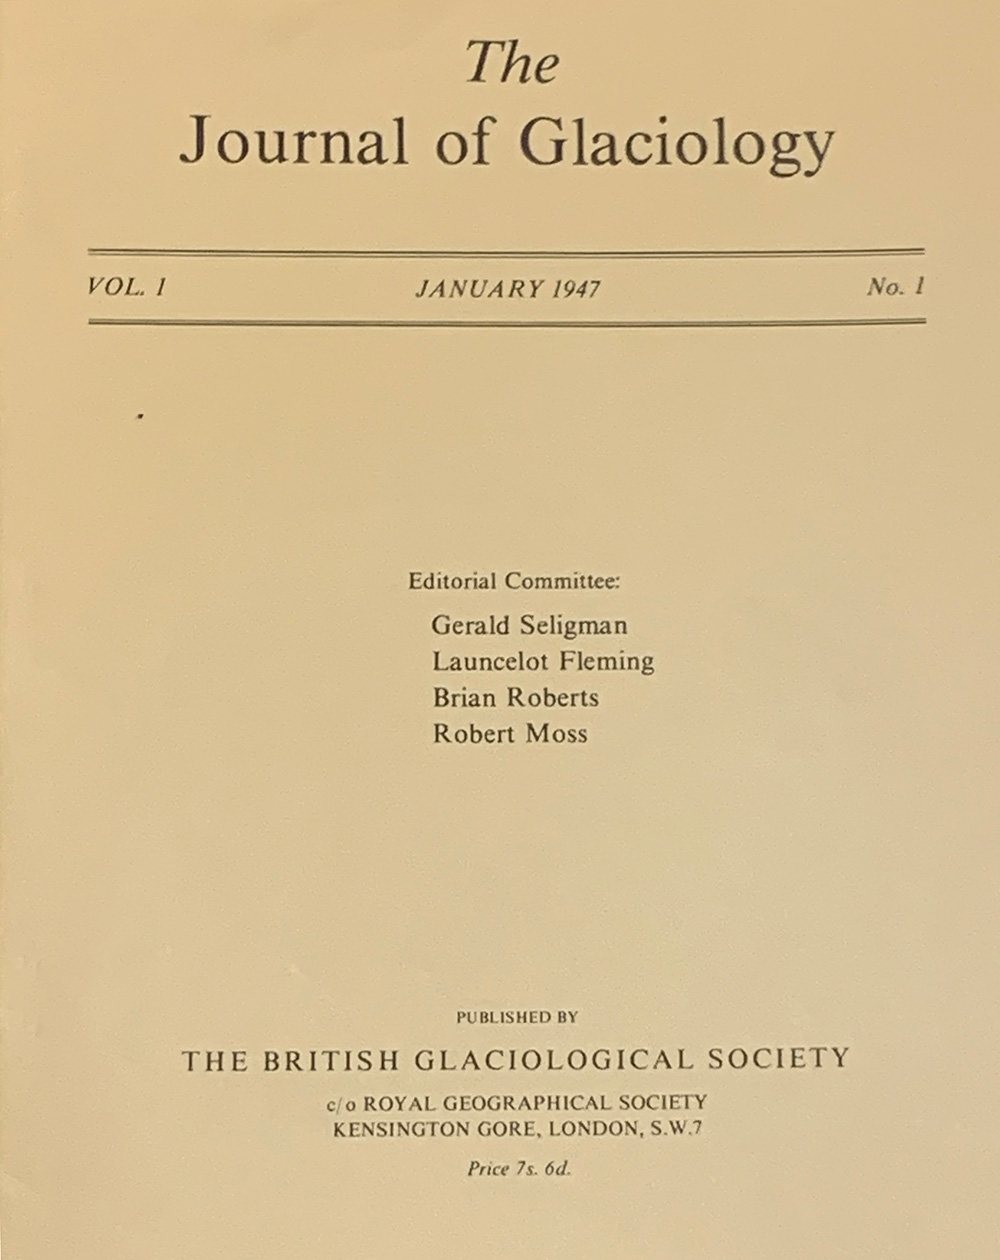 Journal of Glaciology, Issue 1, 1947